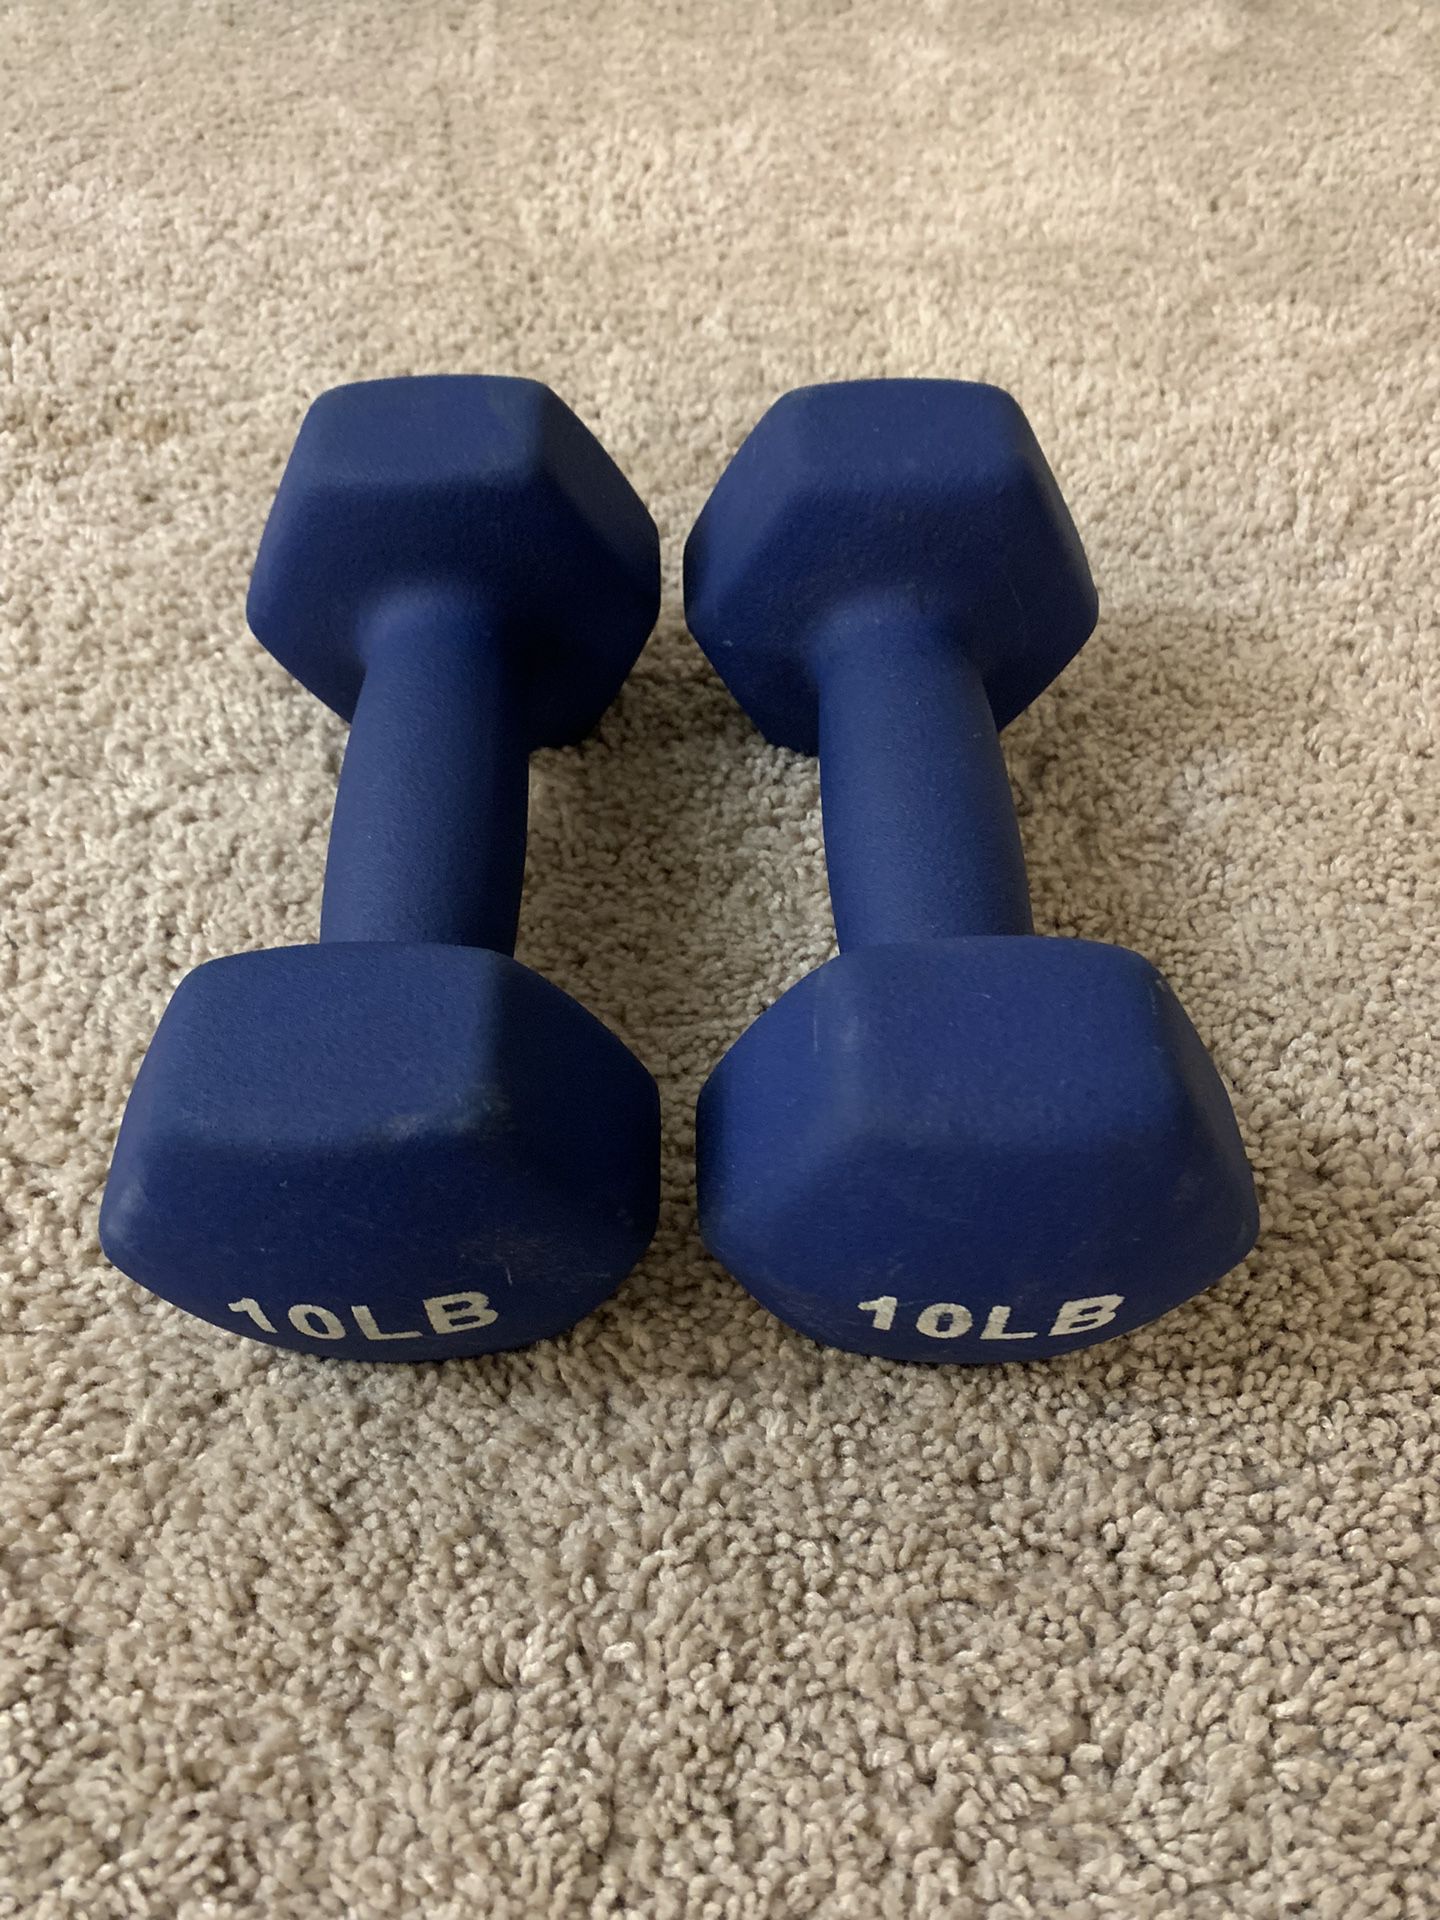 Dumbbells - Pair of 10s - Total 20 Pounds 